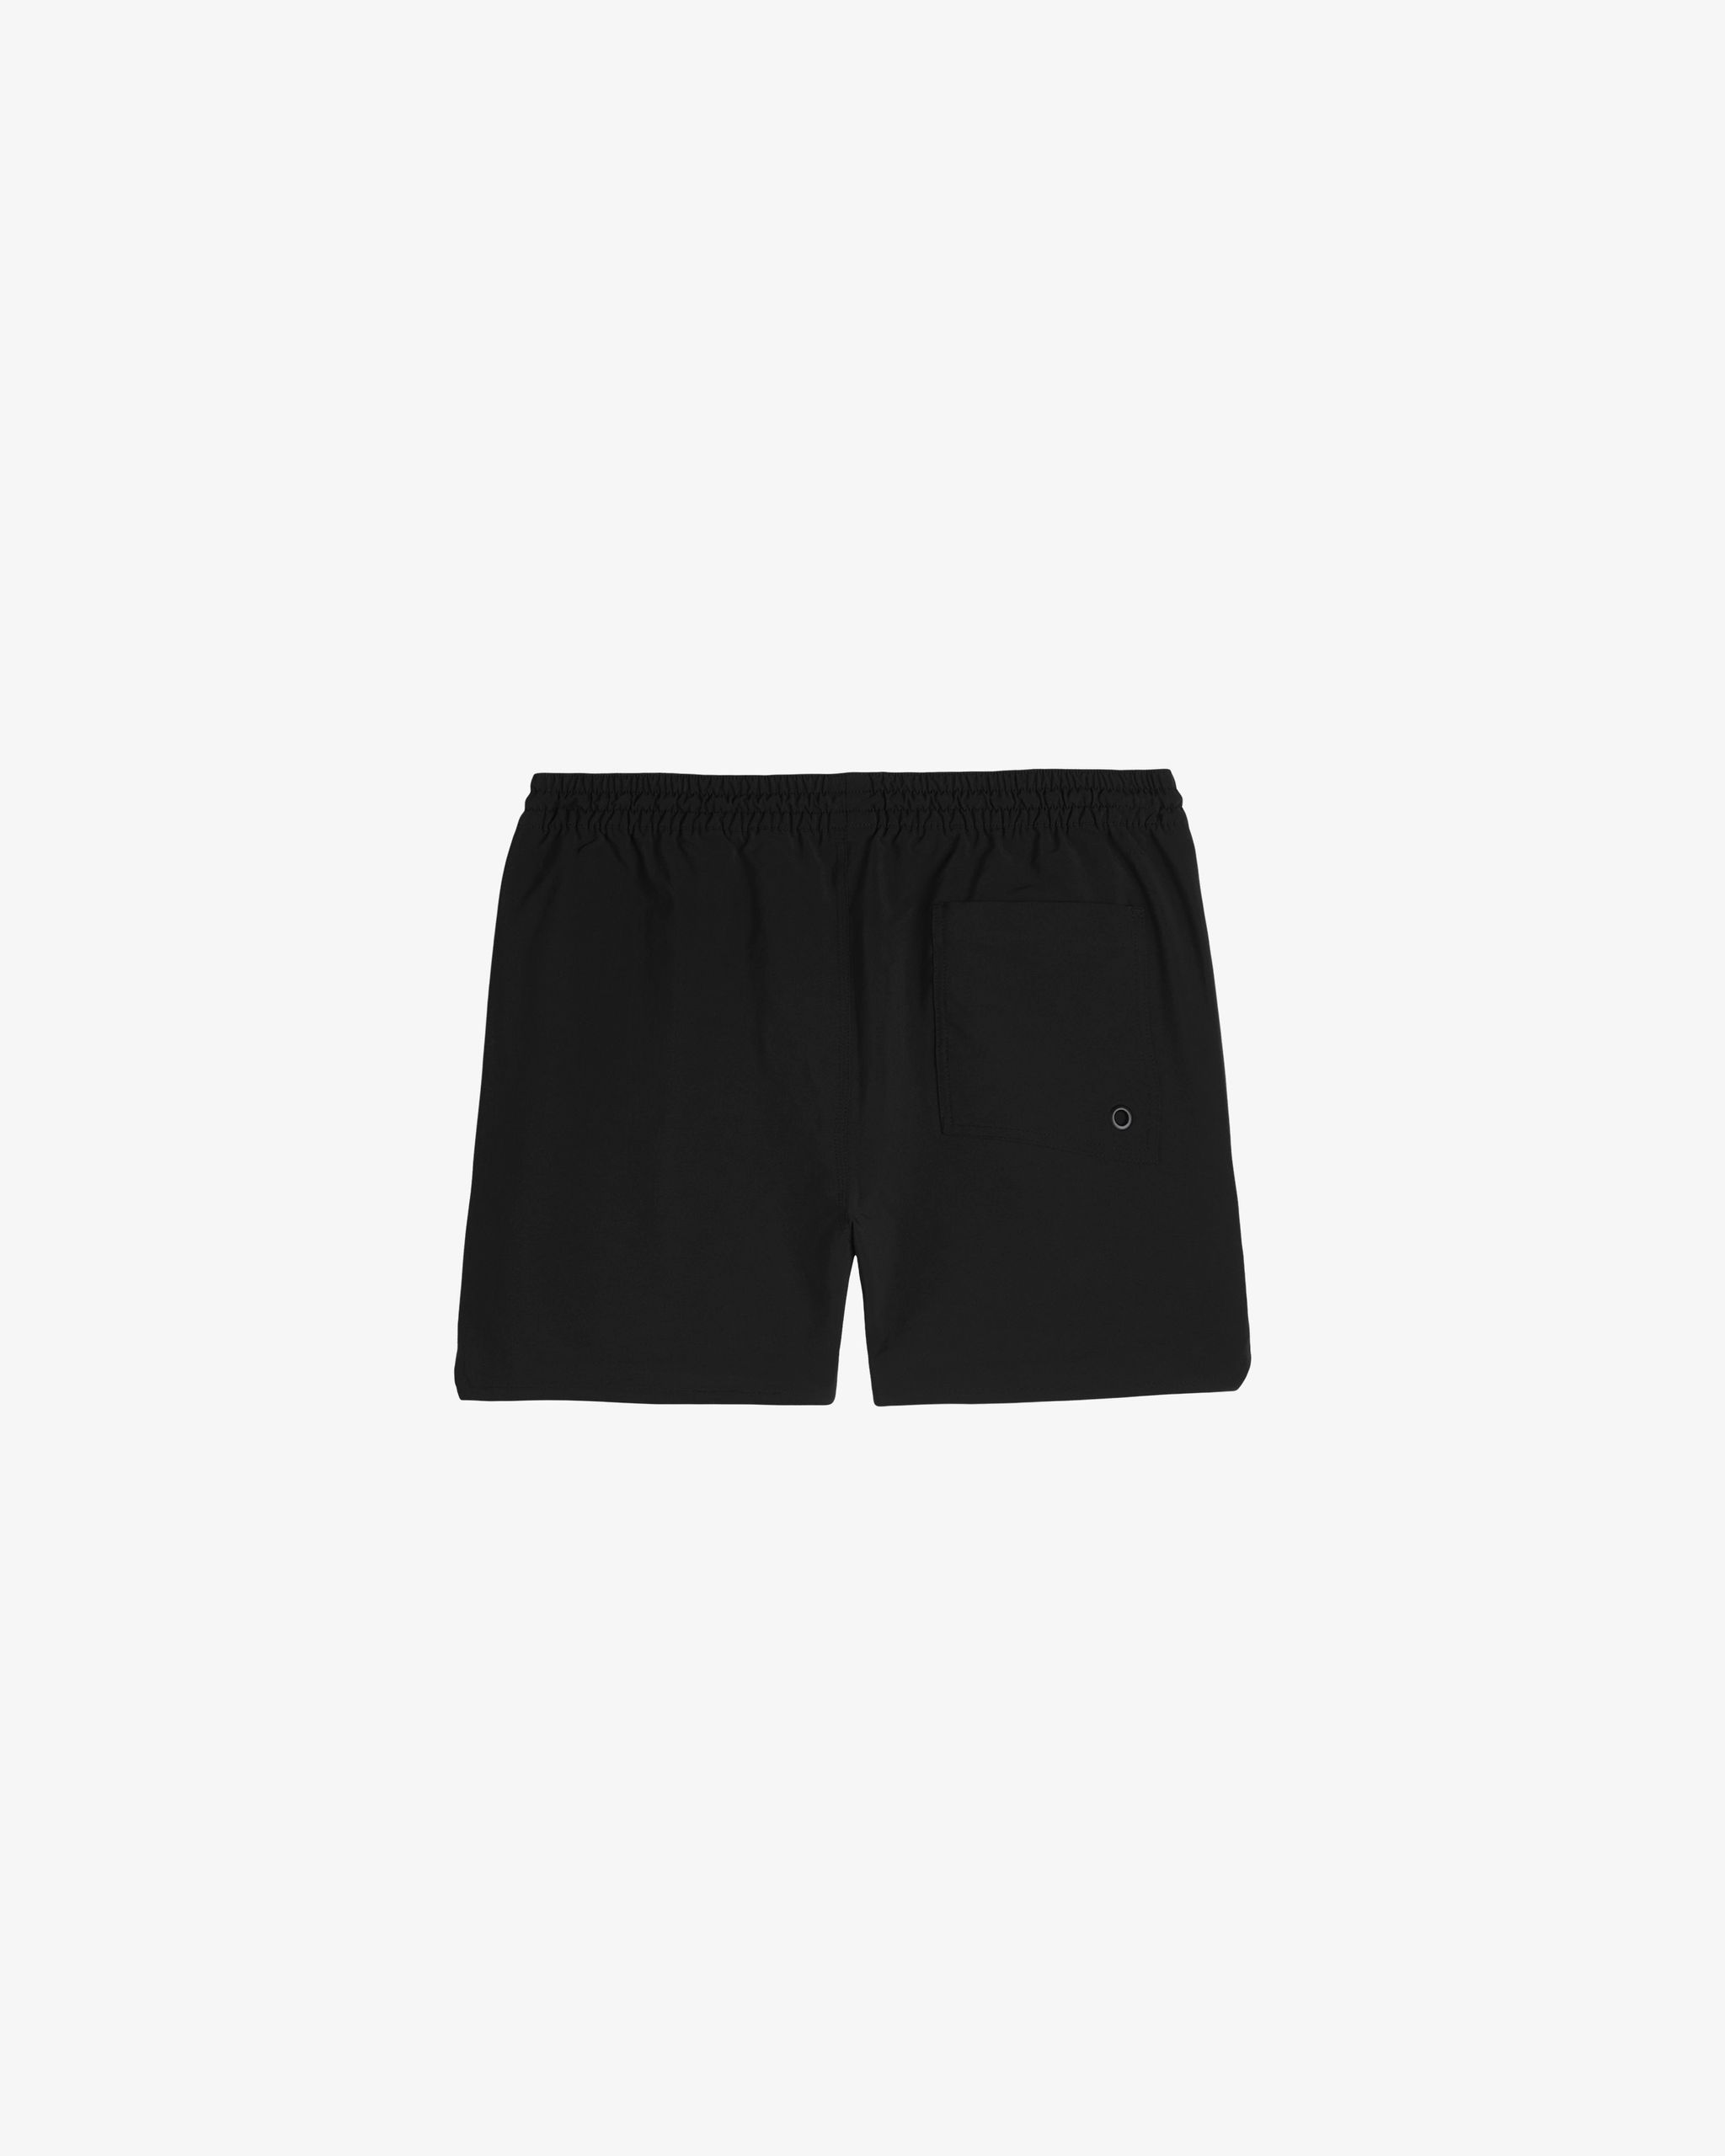 The Shorts | c'est normal - Around here.